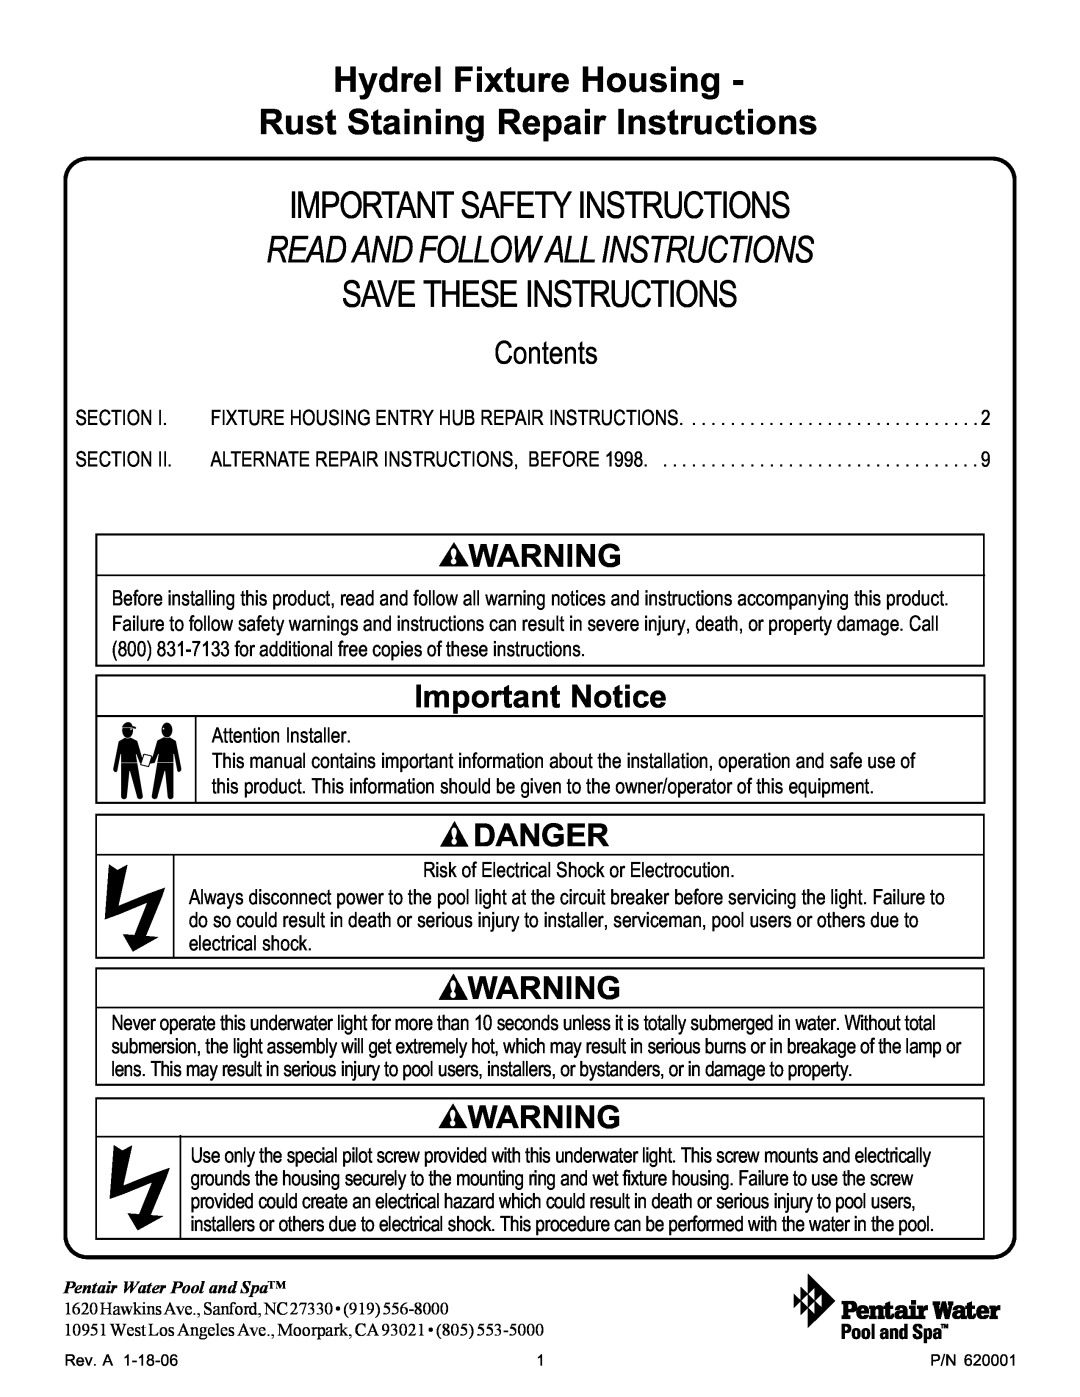 Pentair 620001 important safety instructions Important Safety Instructions Read And Follow All Instructions, Contents 